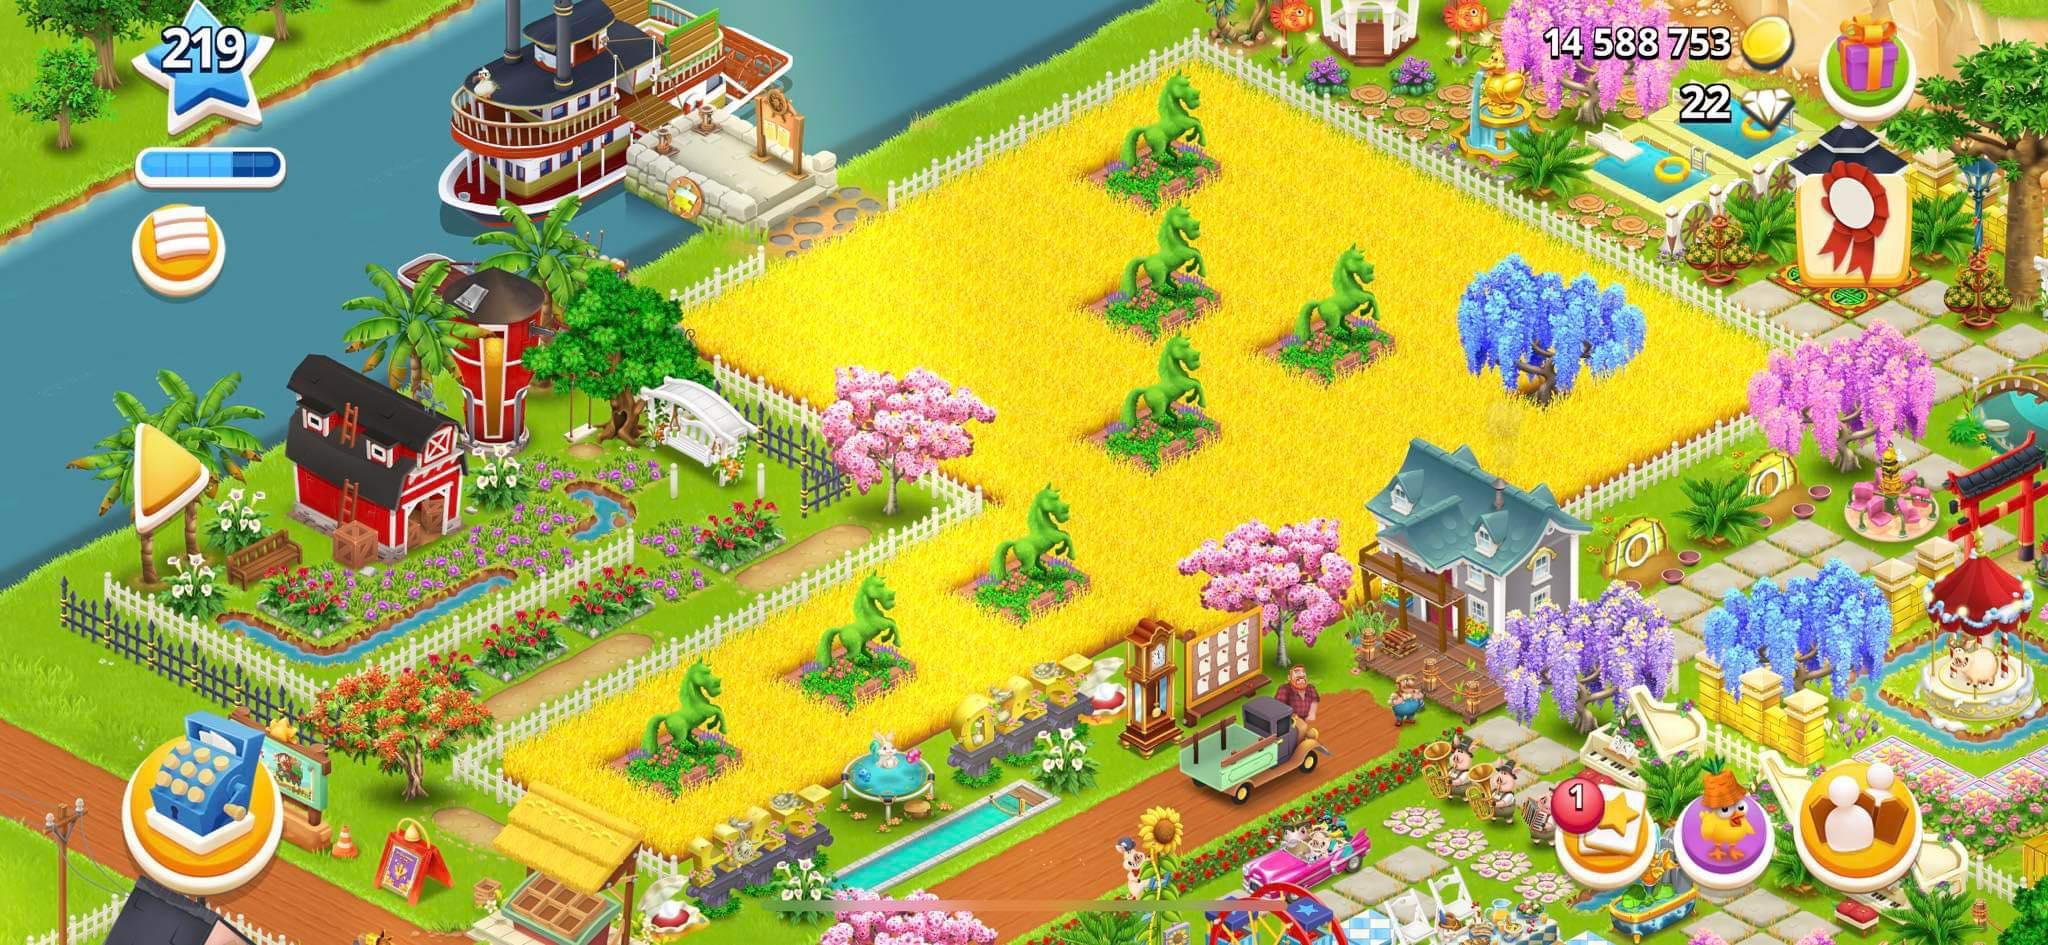 VIP ACC, Level 219 barn 10k2 silo 6k2 - Town Level 48 - has 26 animals - 5 are open - Enough combos of hayday letters, magic tree ferris wheell